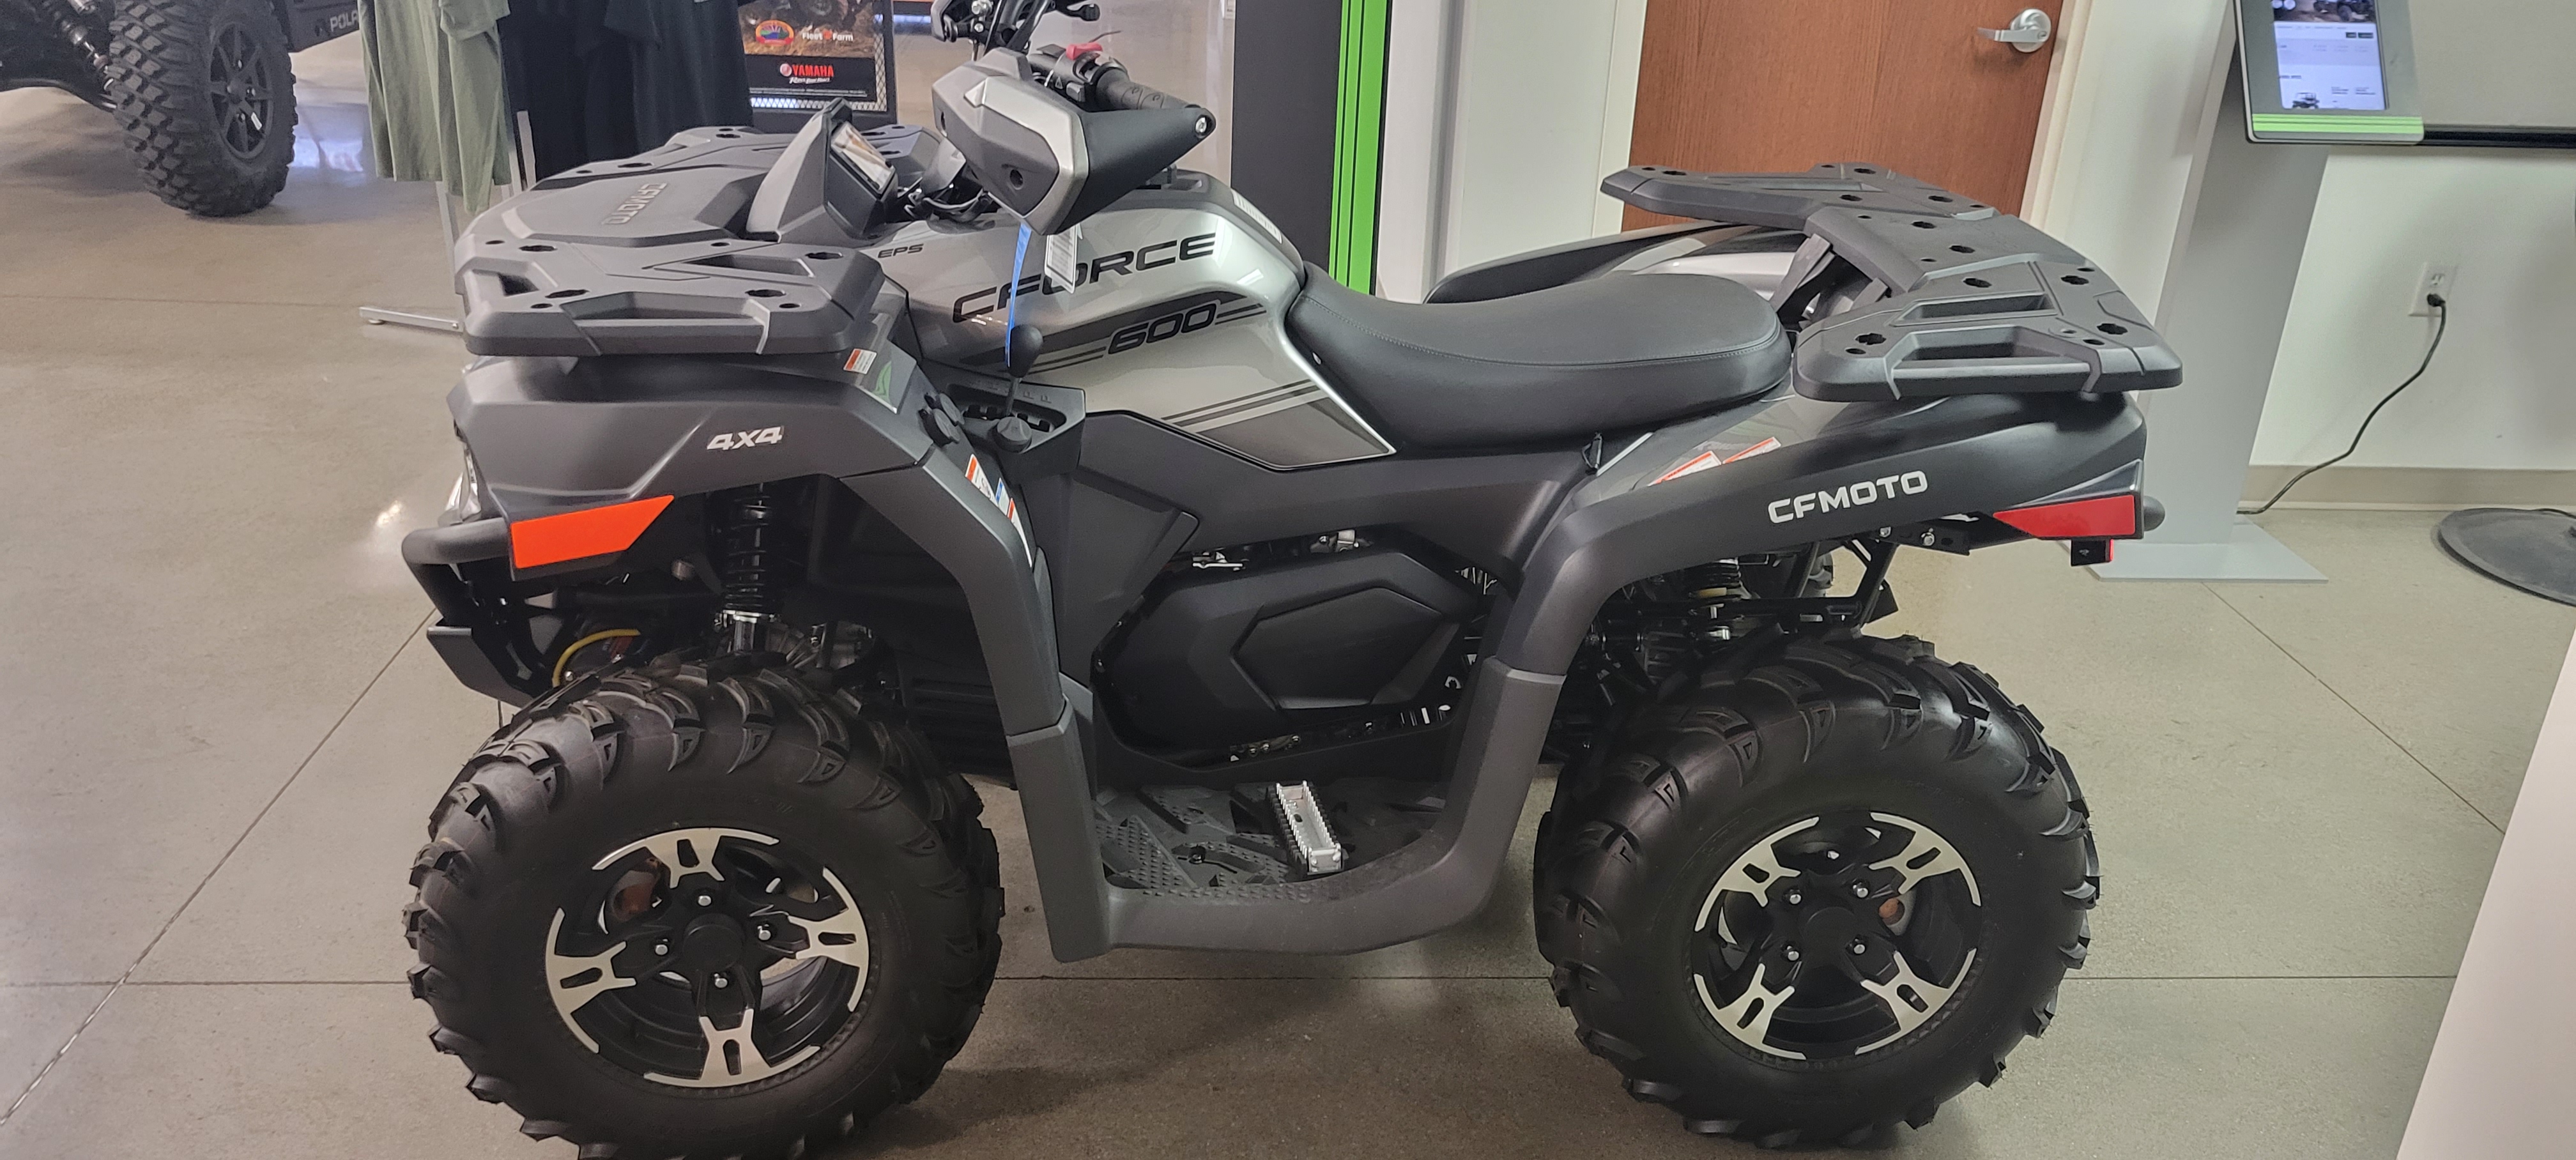 2022 CFMOTO CFORCE 600 at Brenny's Motorcycle Clinic, Bettendorf, IA 52722